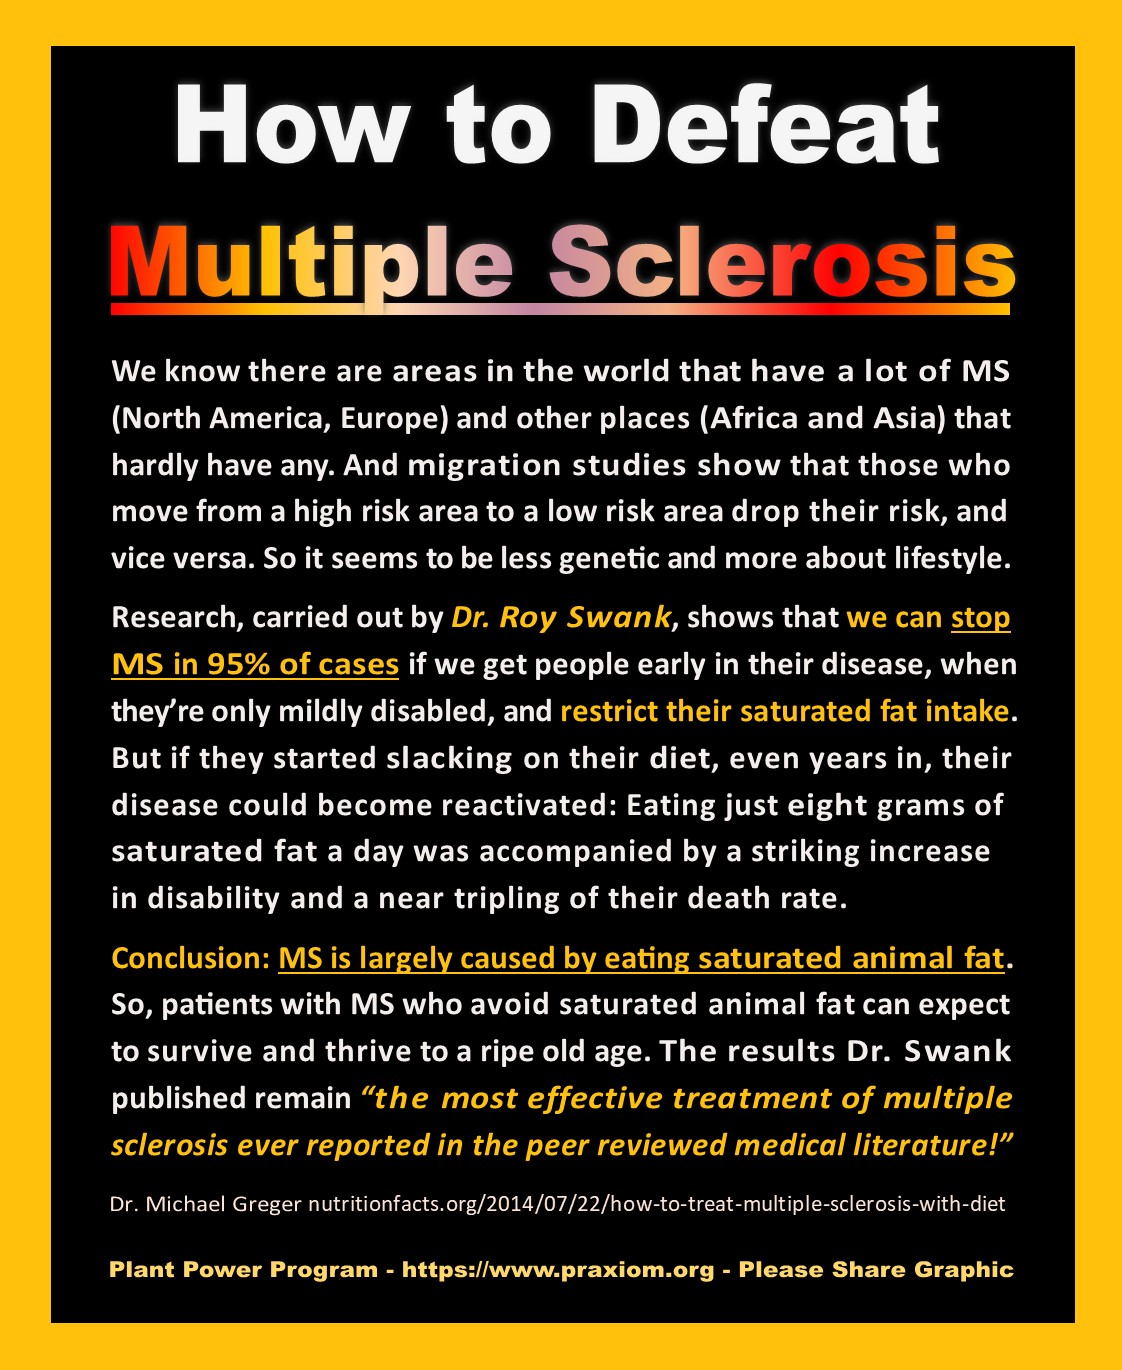 How to Defeat Multiple Sclerosis - Dr. Roy Swank, Dr. Michael Greger